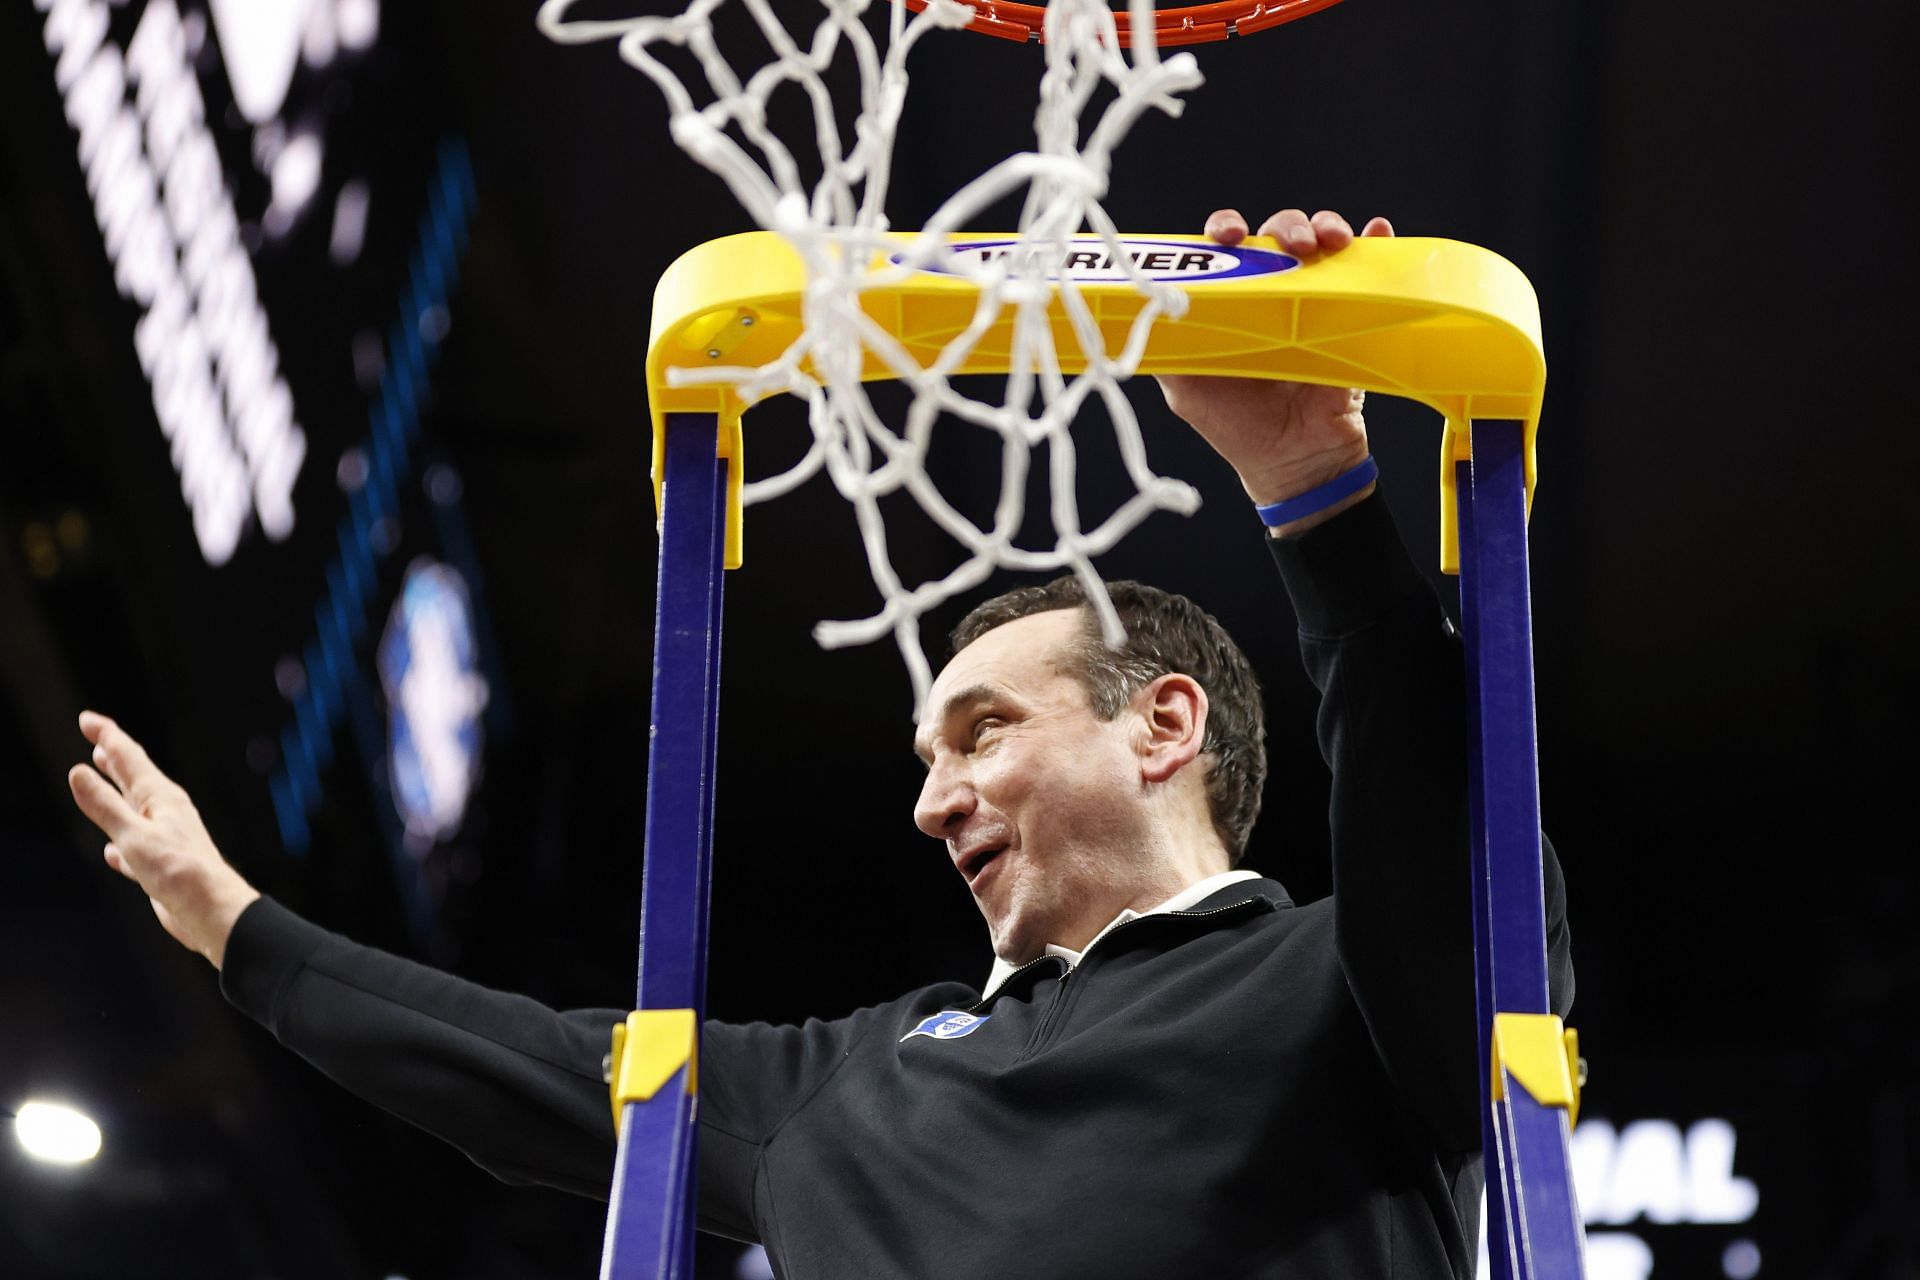 Coach K and Duke&#039;s win secures another regional championship and Final Four in the coach&#039;s final season.